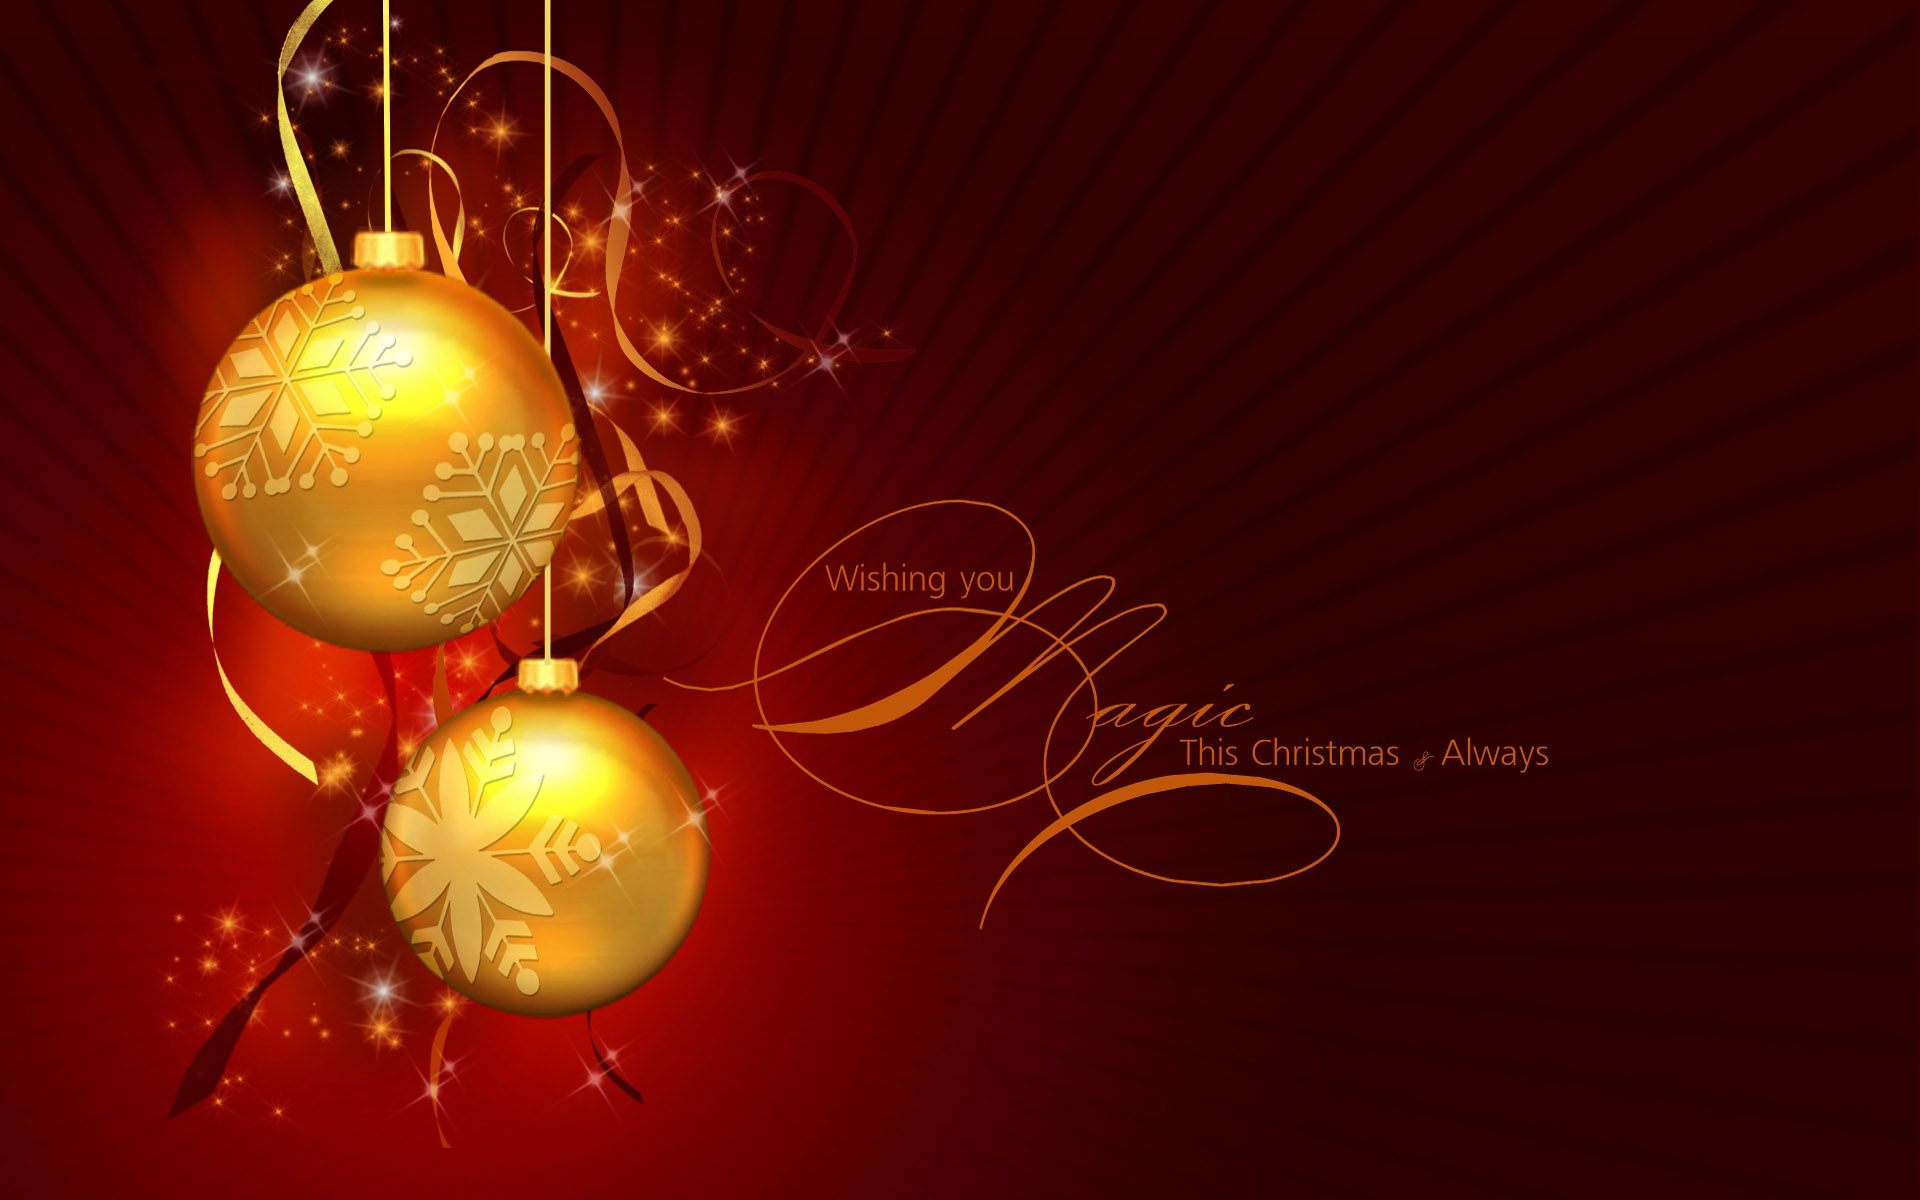 Download full size Merry Christmas wallpaper / People / 1920x1200